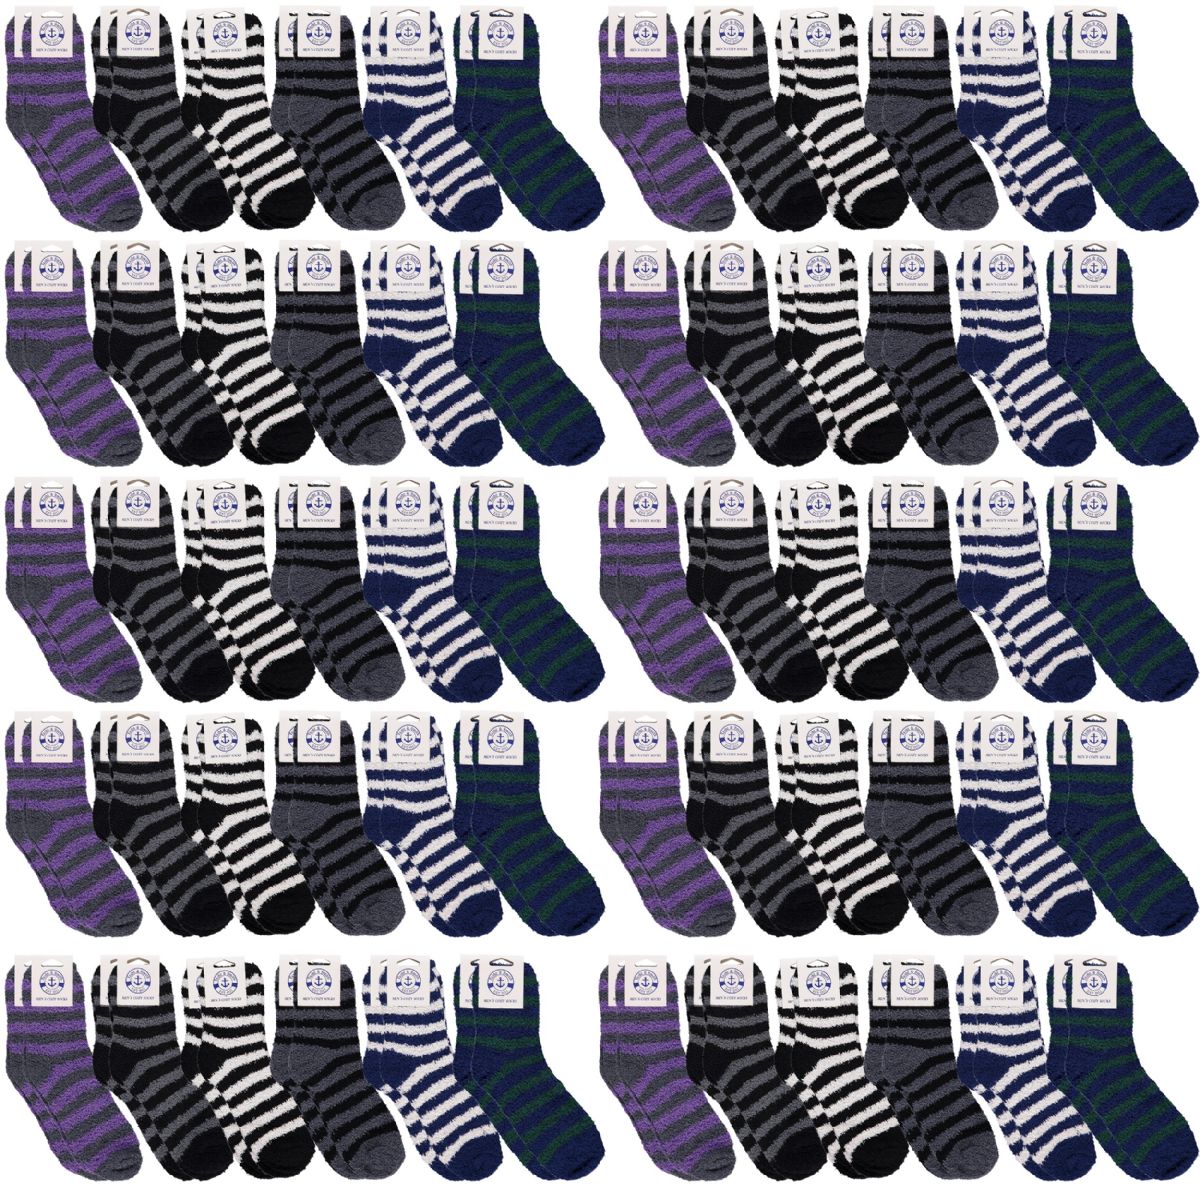 60 Pieces of Yacht & Smith Men's Assorted Colored Warm & Cozy Fuzzy Socks